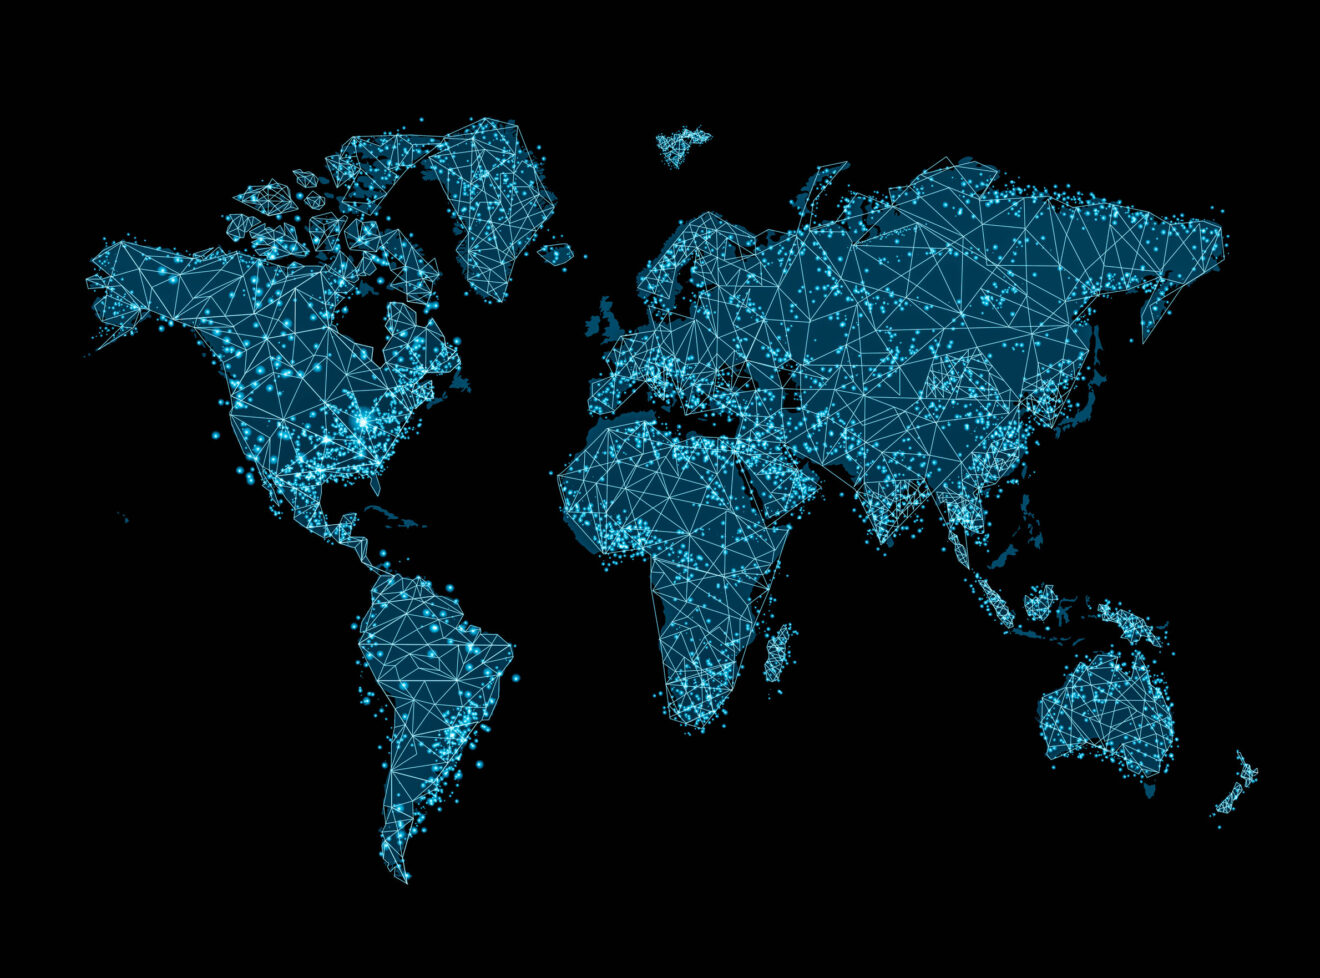 World map on a technological background, glowing lines symbols of the Internet, radio, television, mobile and satellite communications. Internet Concept of global business.